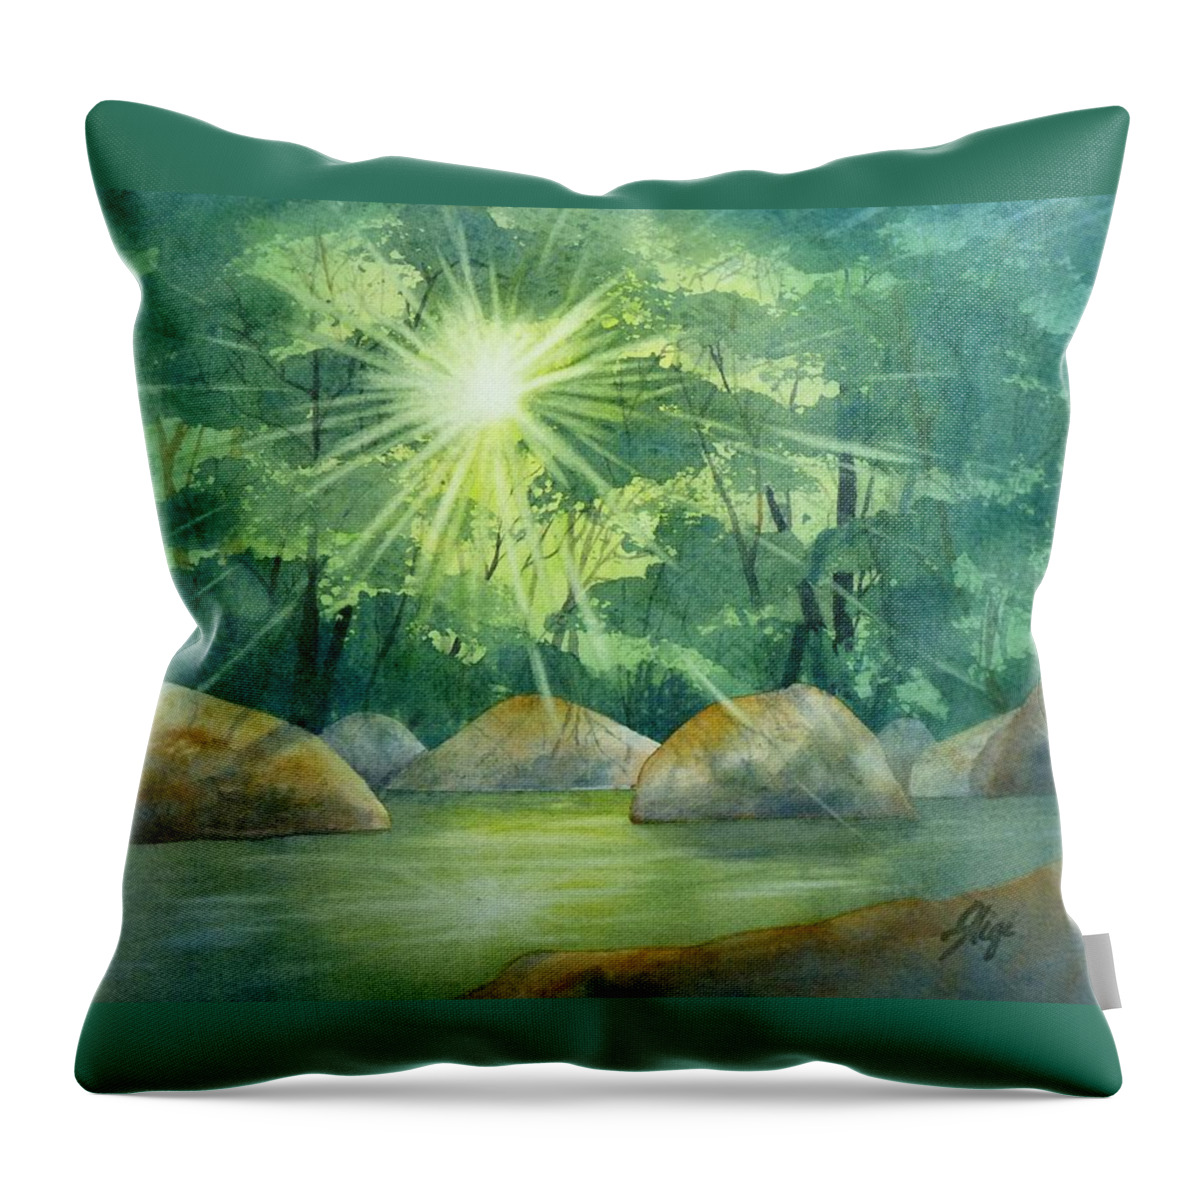 Sun Throw Pillow featuring the painting Radiant Recess by Gigi Dequanne